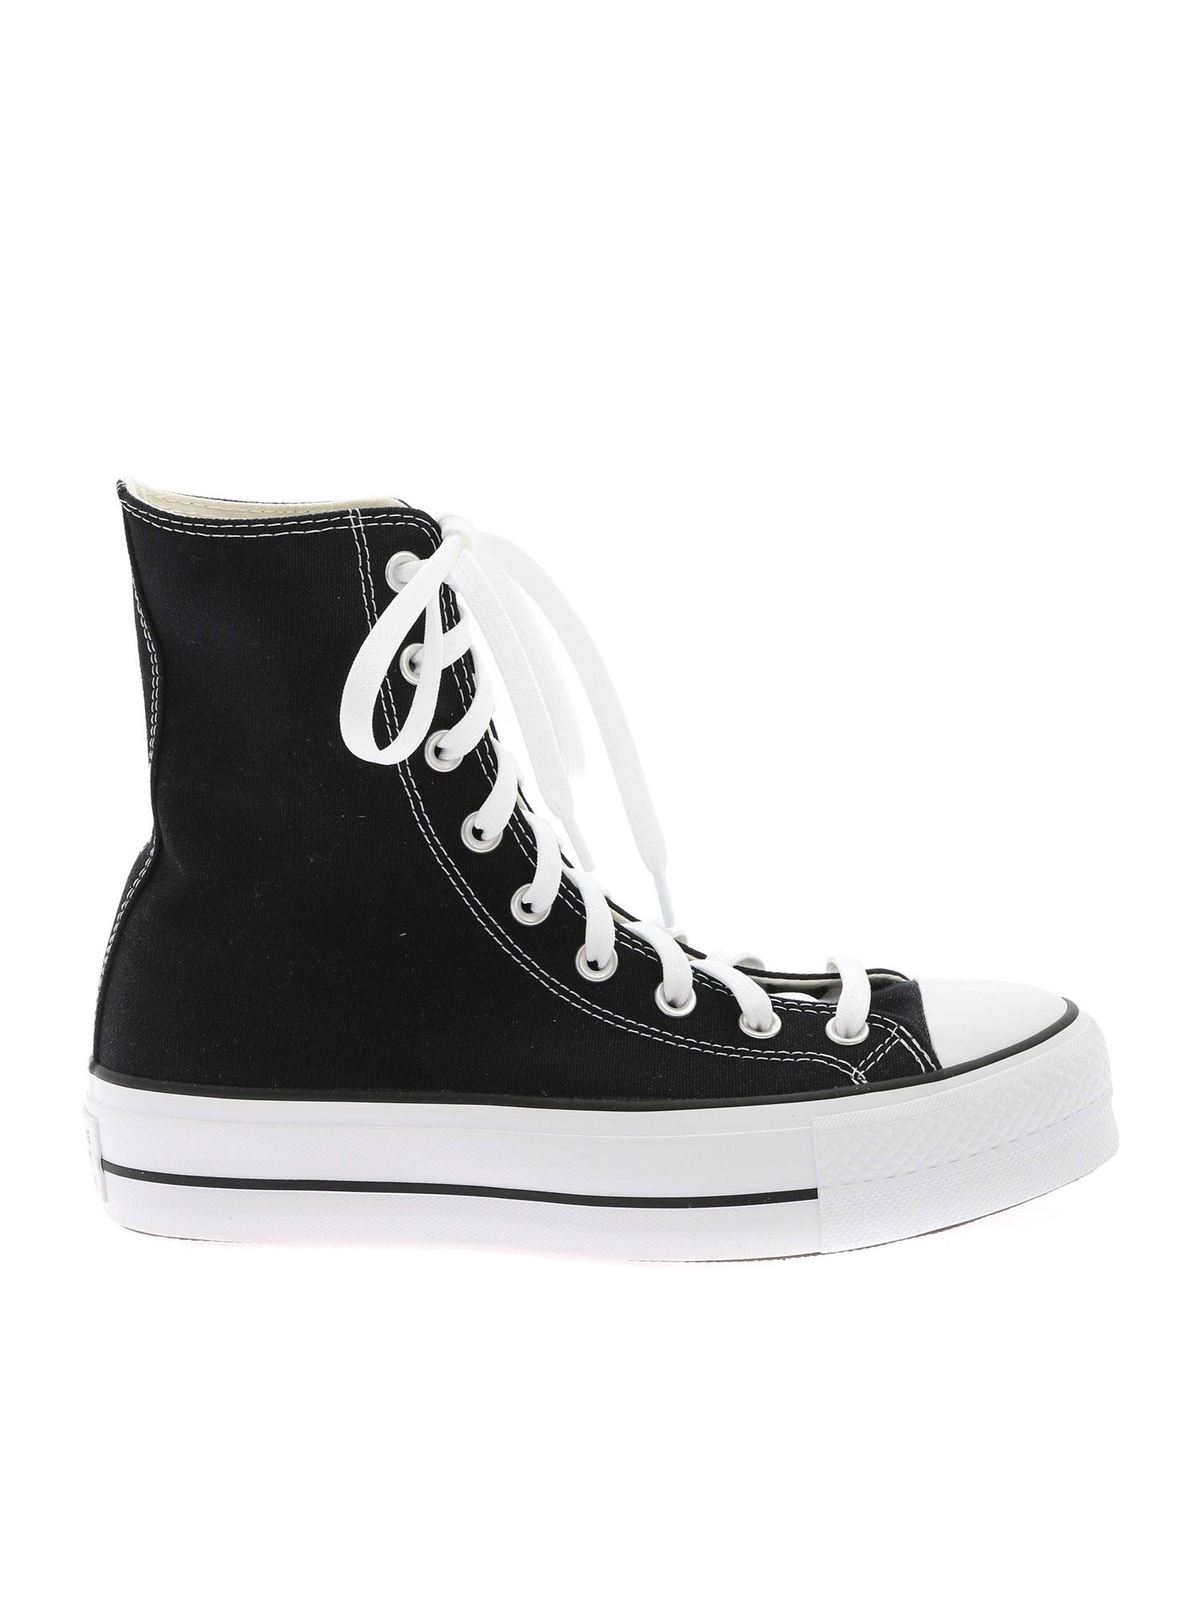 CONVERSE HIGH PLATFORM CHUCK TAYLOR trainers IN BLACK